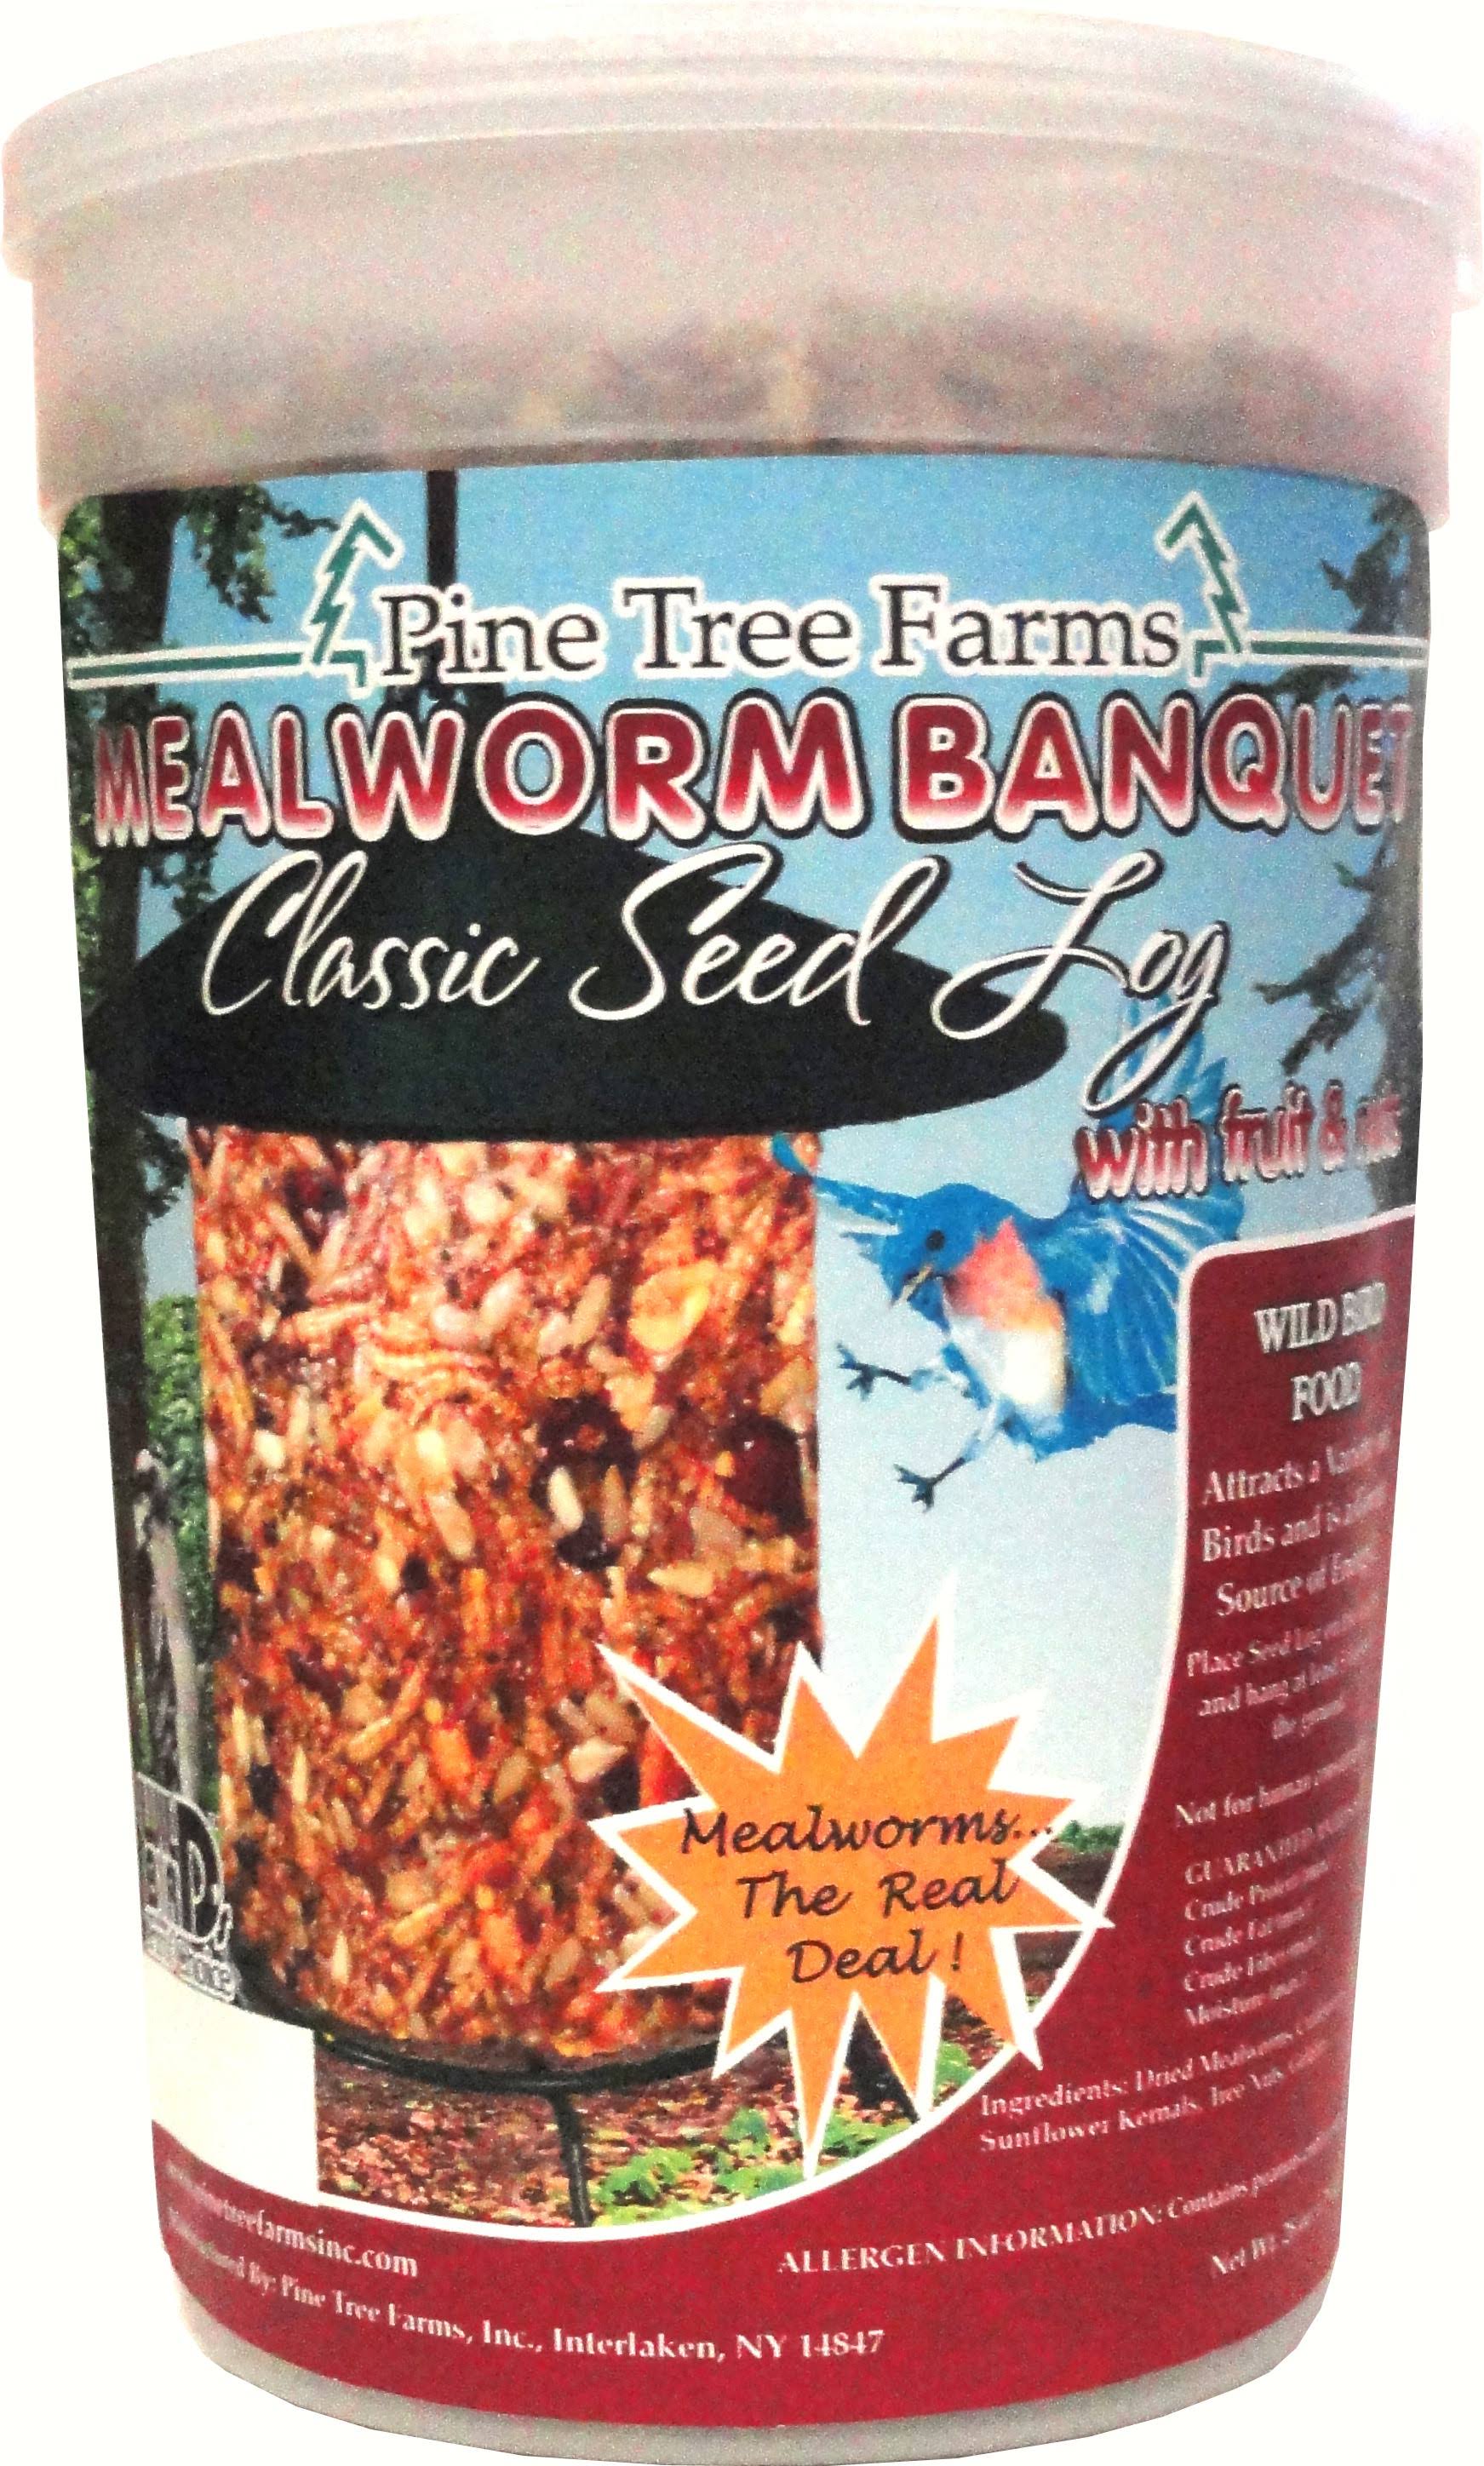 Pine Tree Farms Mealworm Banquet Classic Seed Log Wild Bird Food - with Fruits and Nuts